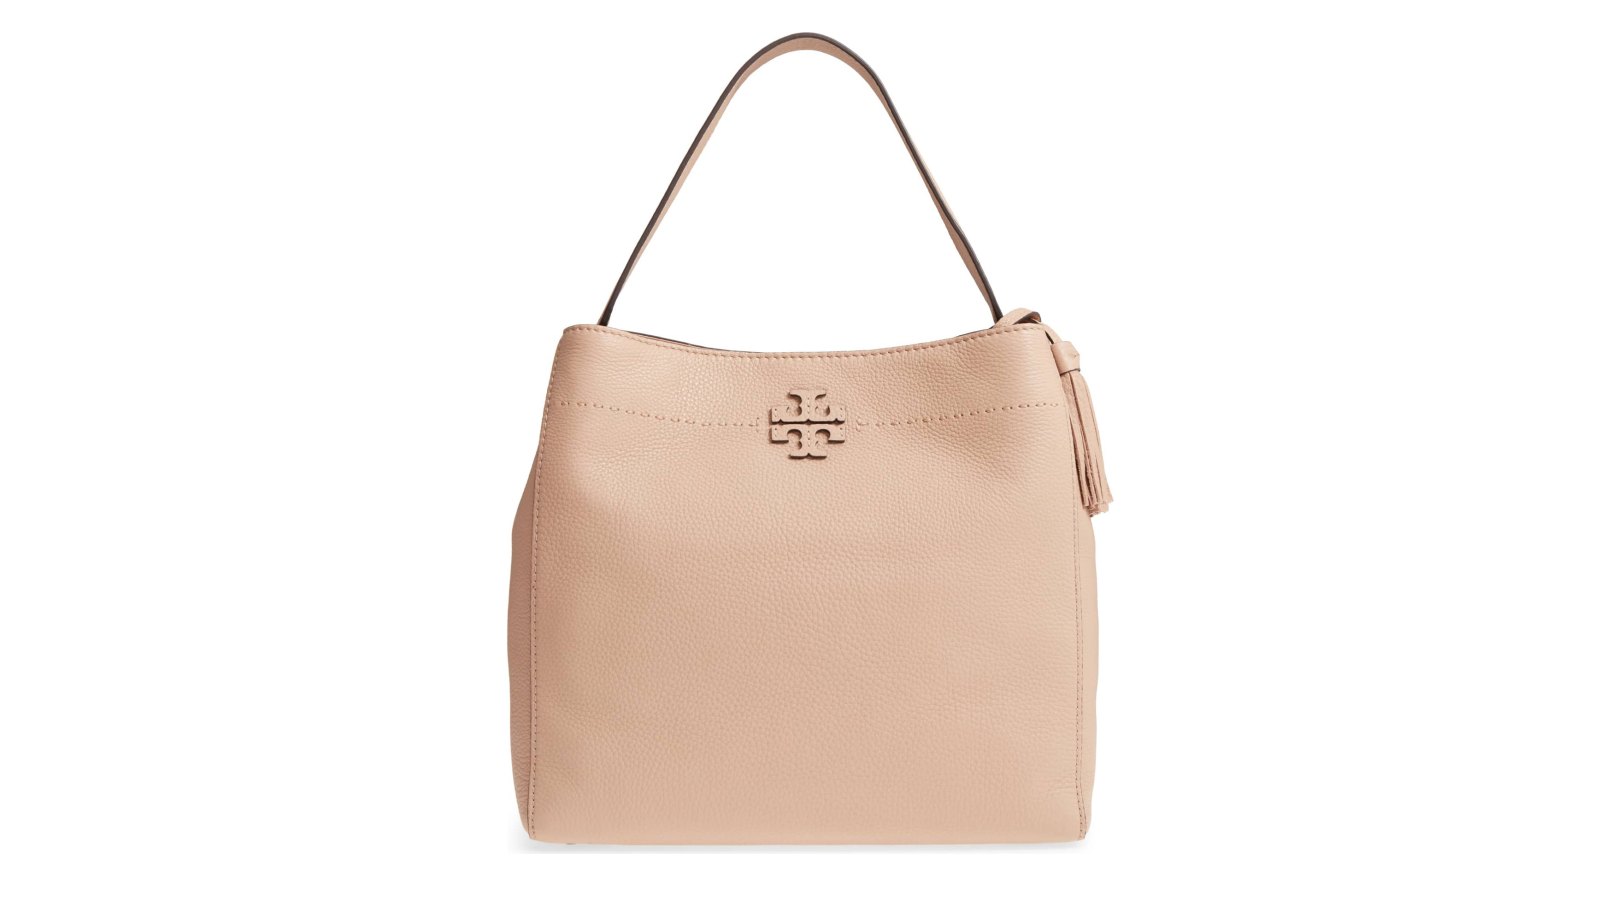 Splurge on This Tory Burch Hobo Bag Because It's on Sale